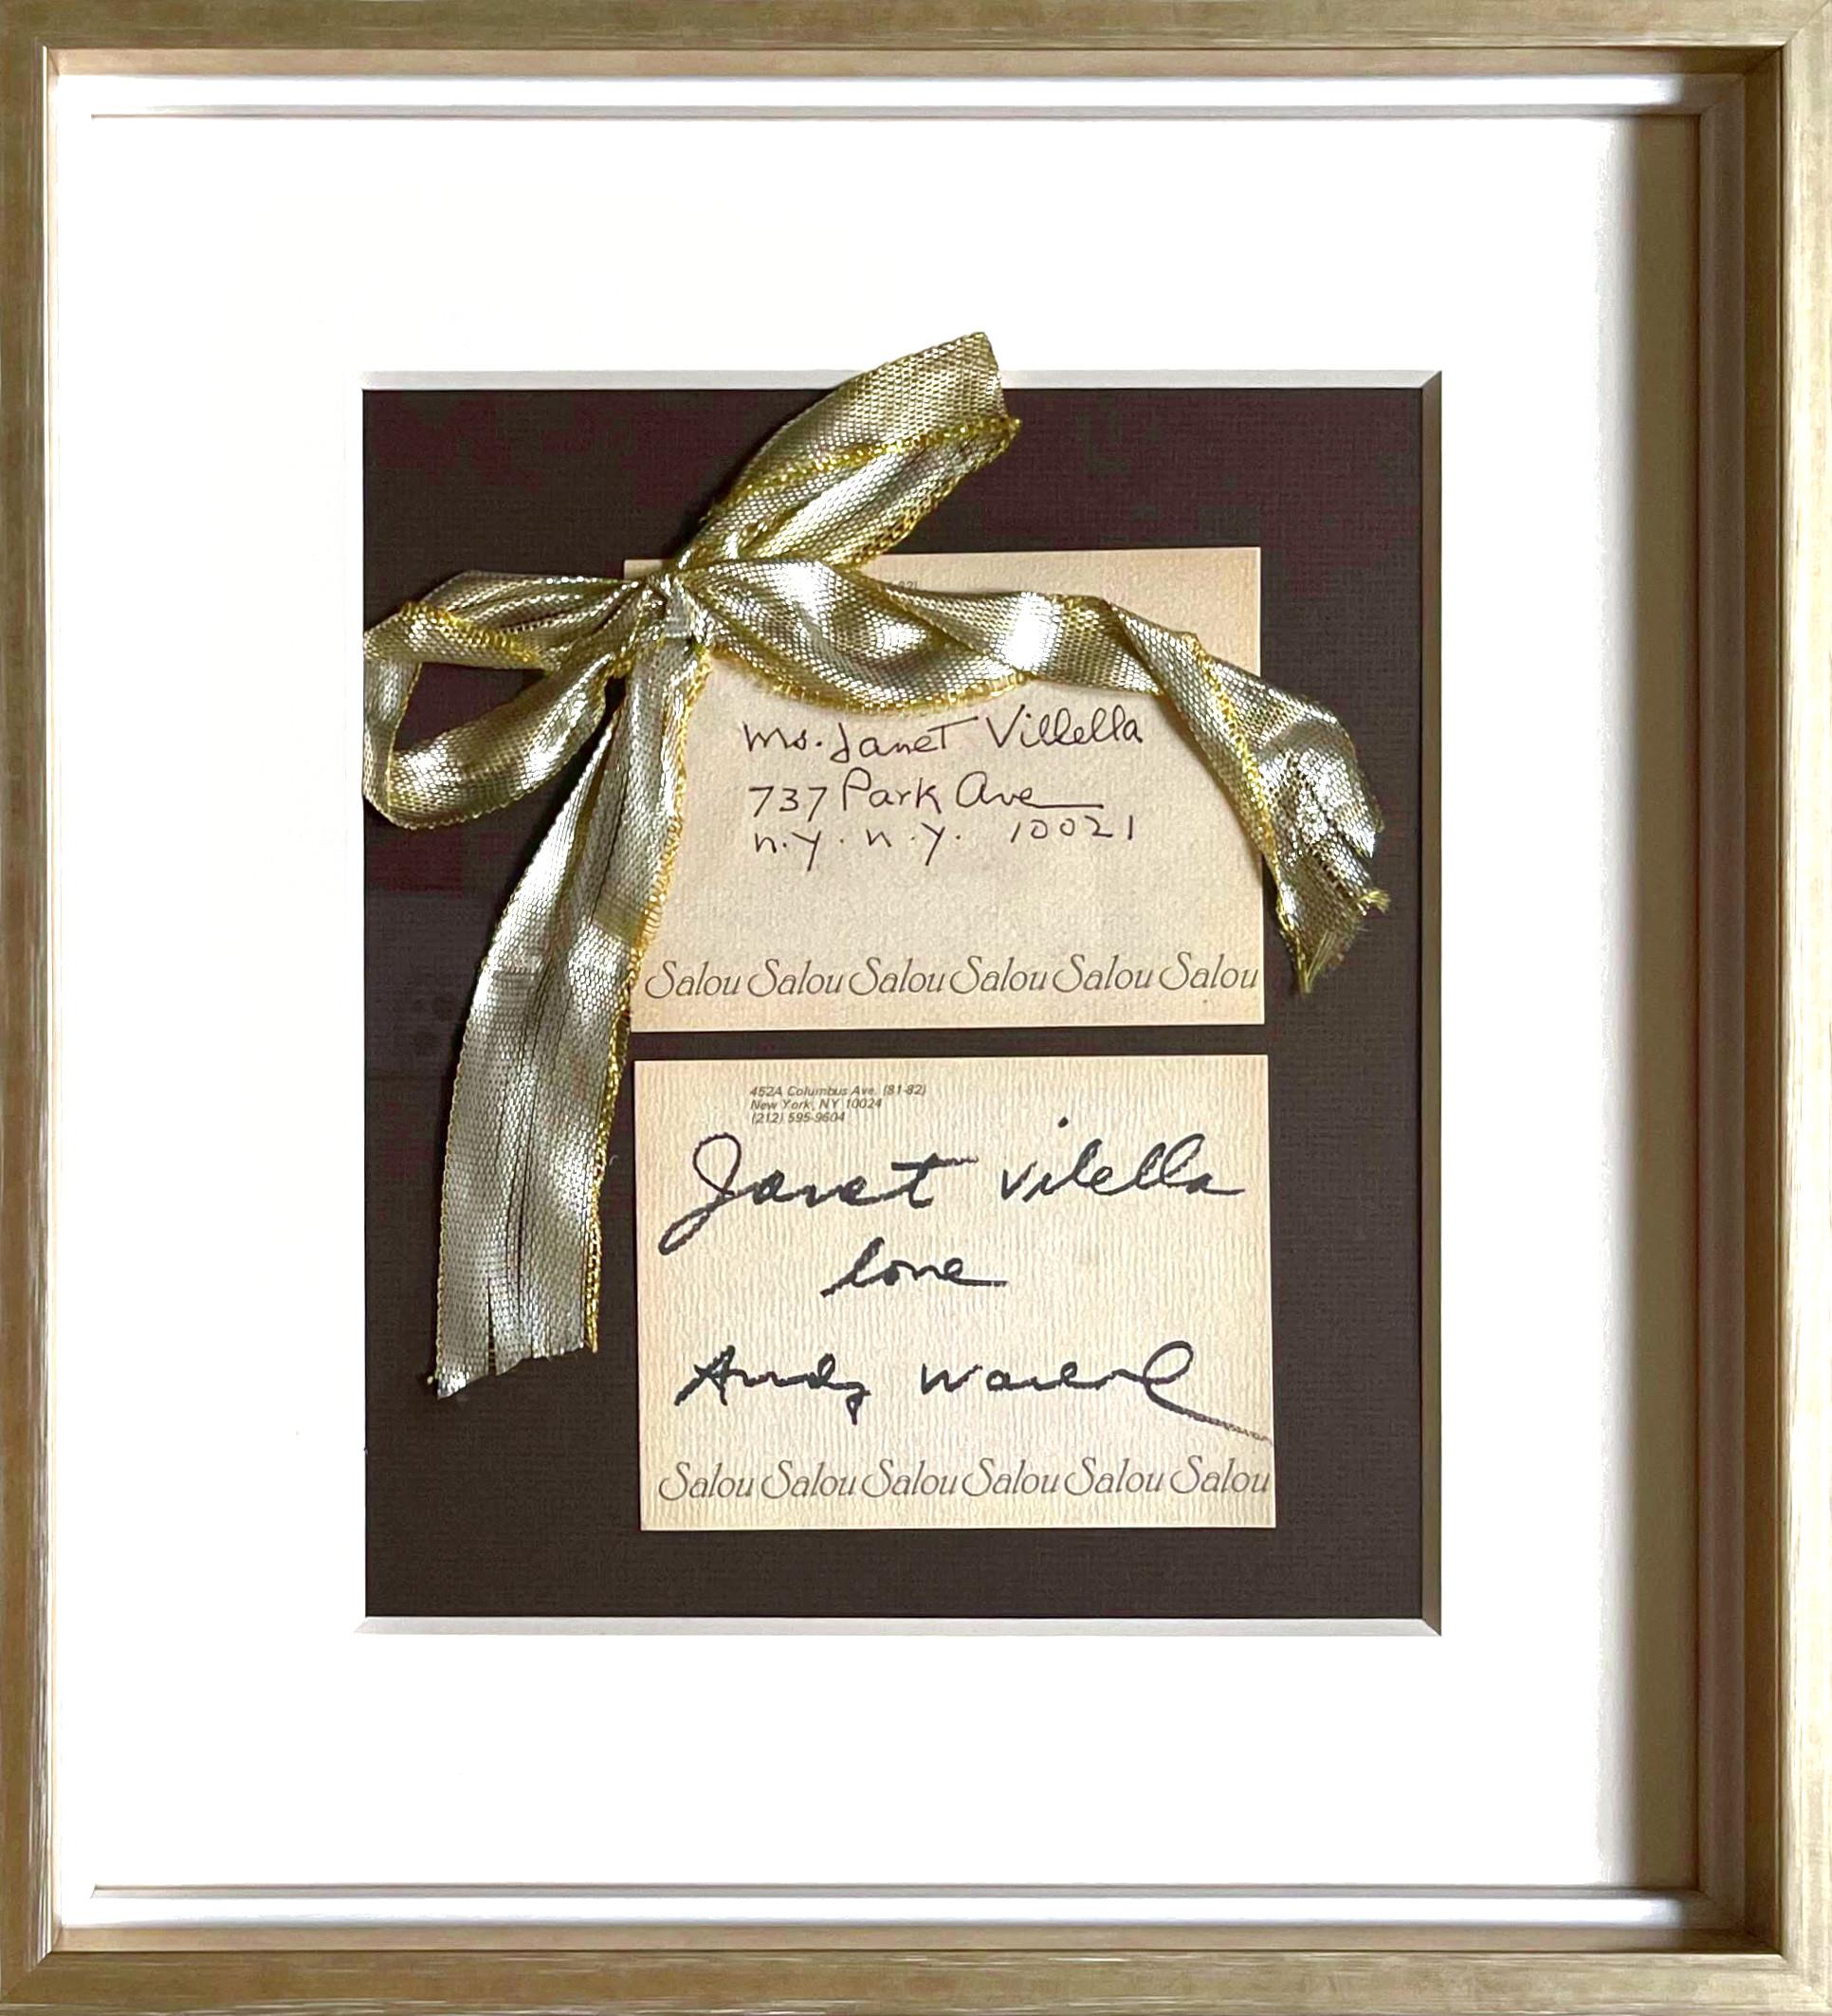 Makes a unique and memorable gift! Who wouldn't want a card with a ribbon that reads "Love, Andy Warhol" - from Warhol himself? 

Andy Warhol
Love, Andy Warhol, ca. 1979
Ink on card with bow and original handwritten envelope
Hand signed and